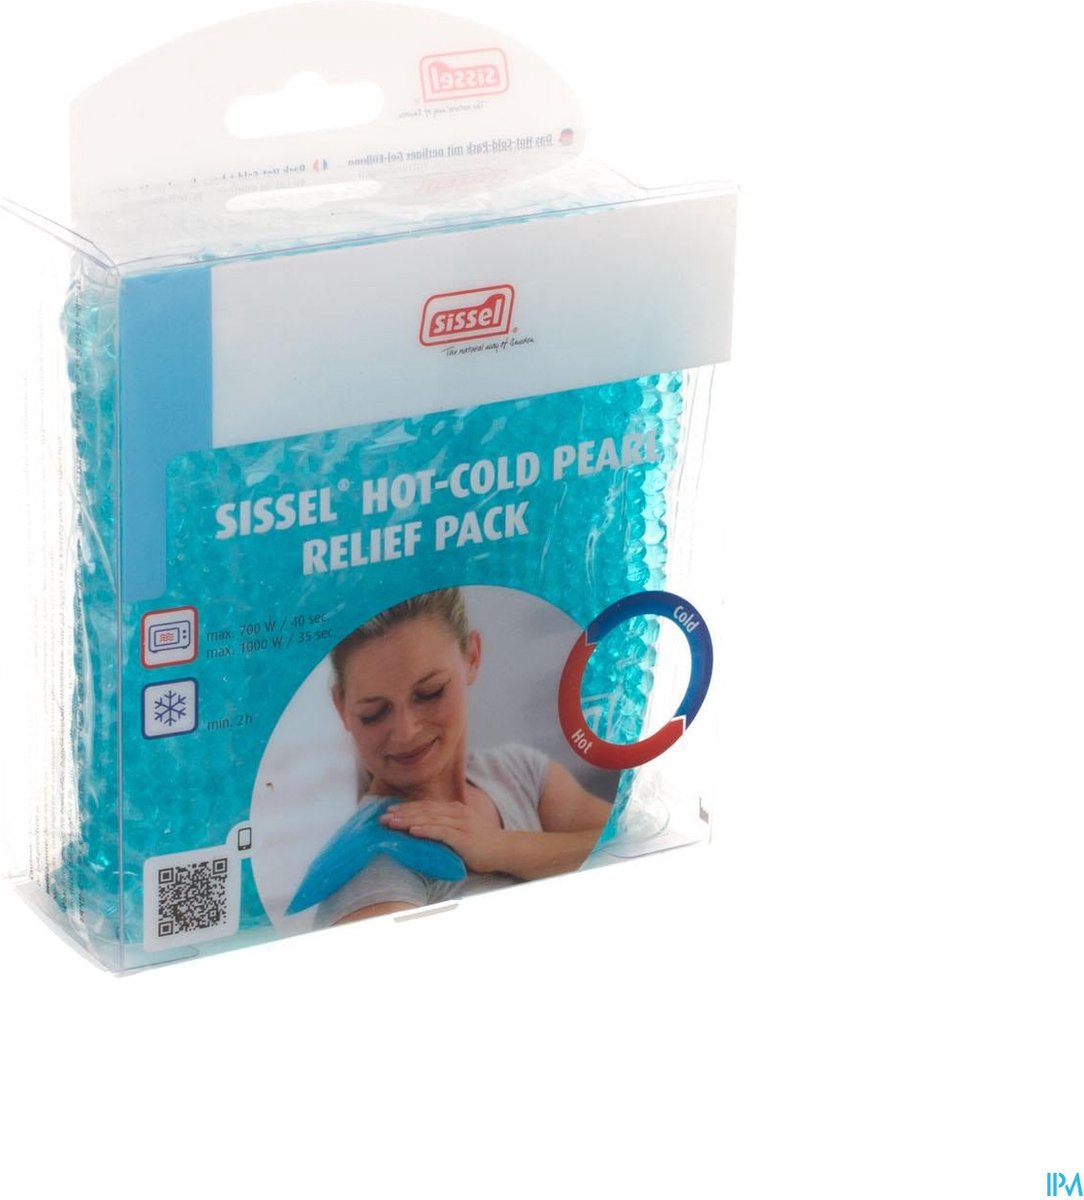 Sissel Hot Cold Pearl Relief Pack